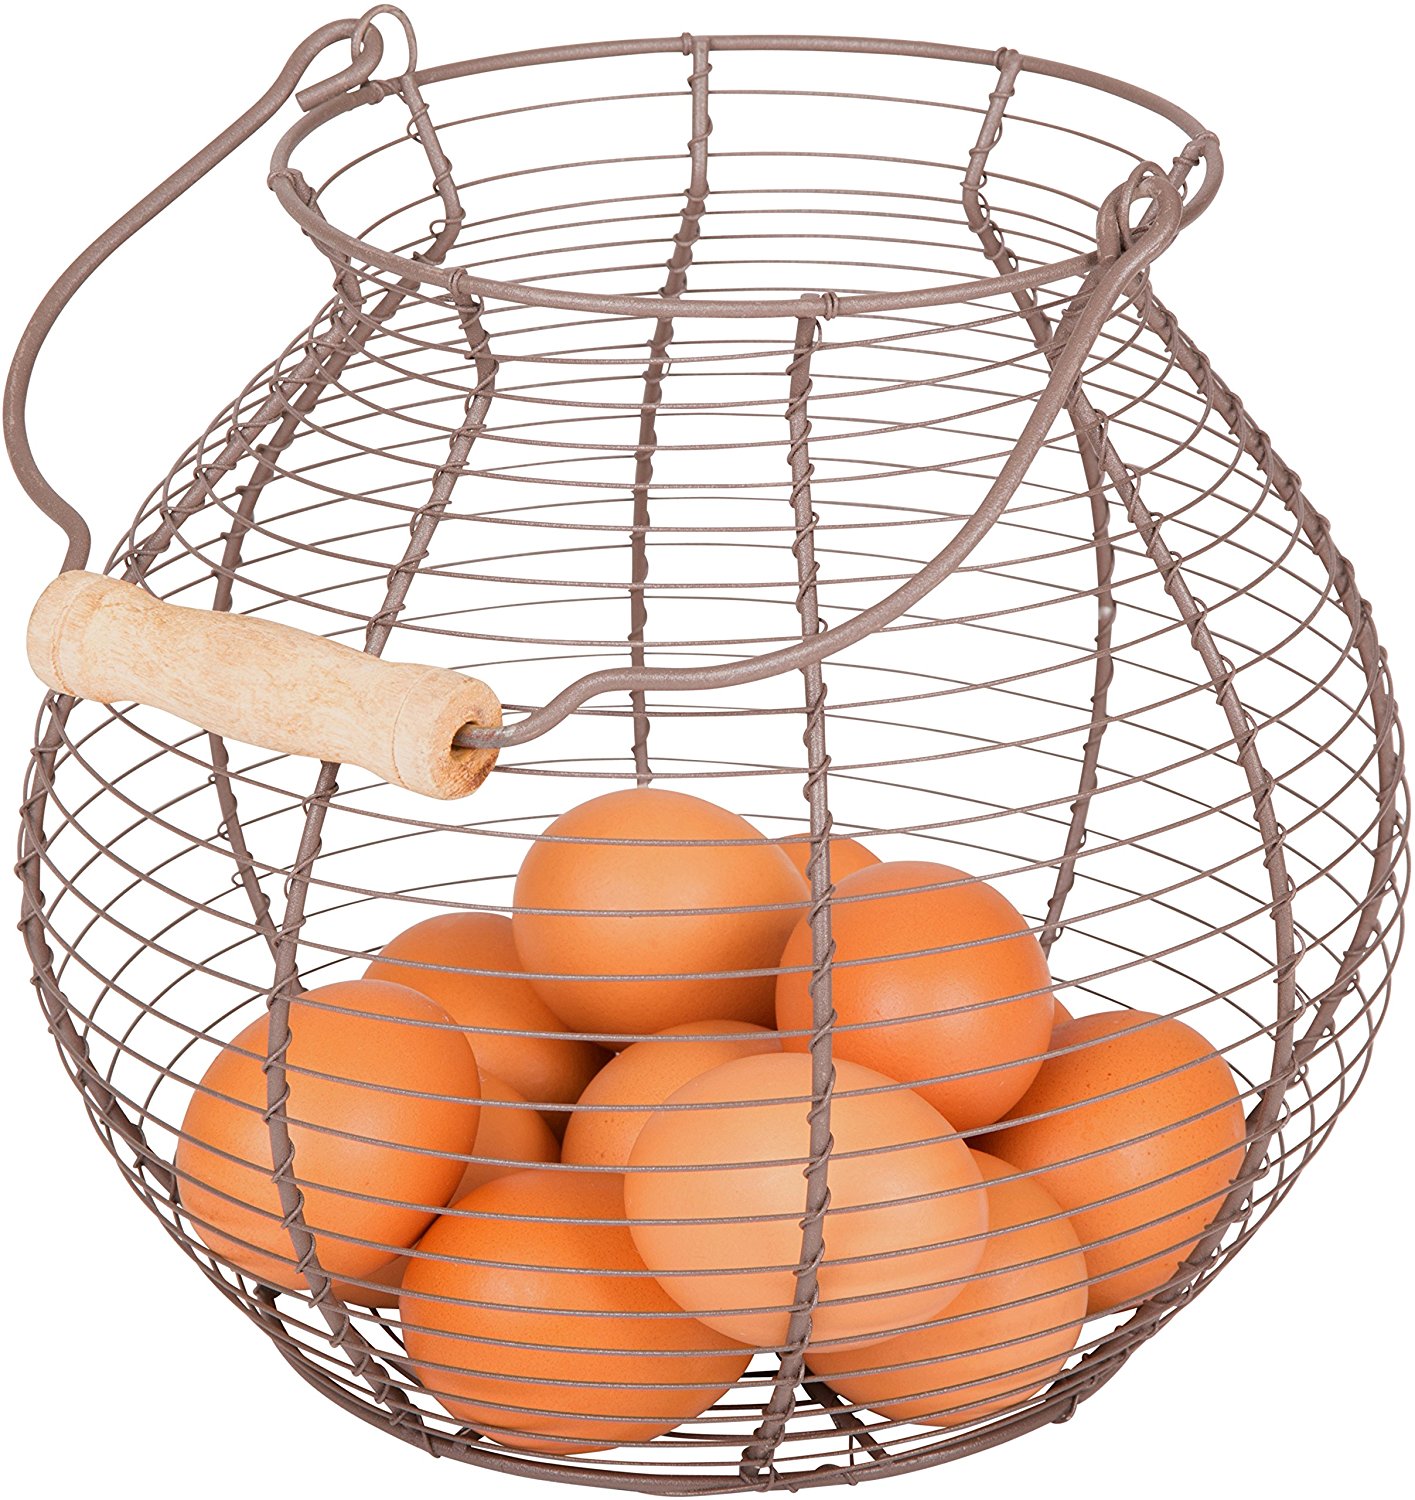 Amazon.com: Wire Egg Basket - Vintage Style - By Trademark ...